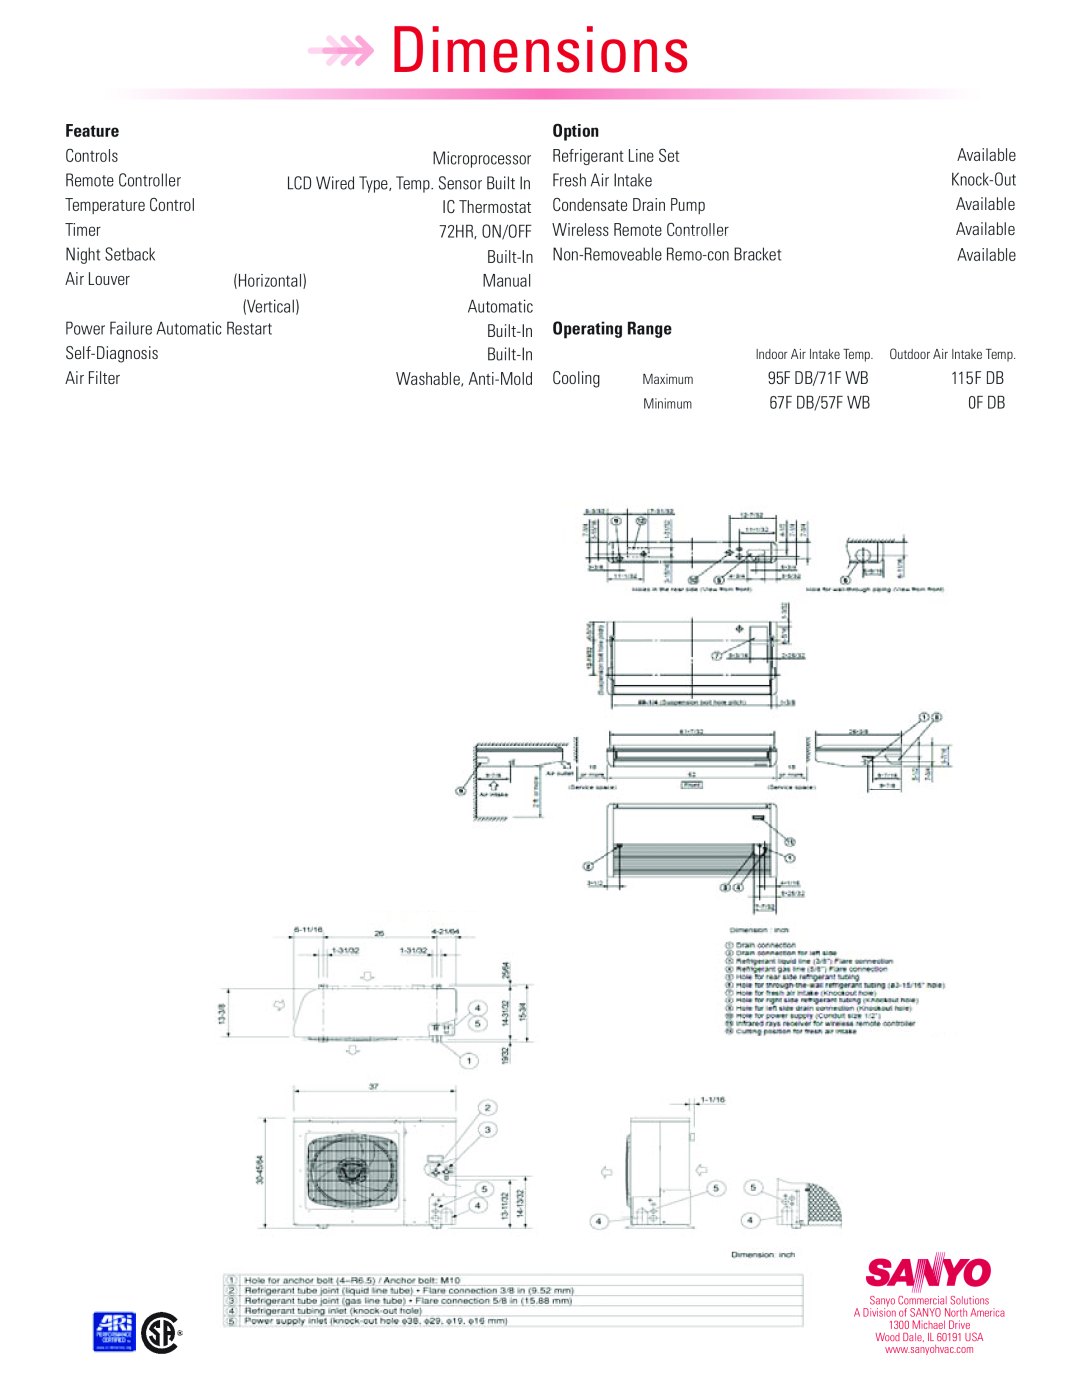 Sanyo 42TW72R dimensions Dimensions, Feature, Option, Operating Range 